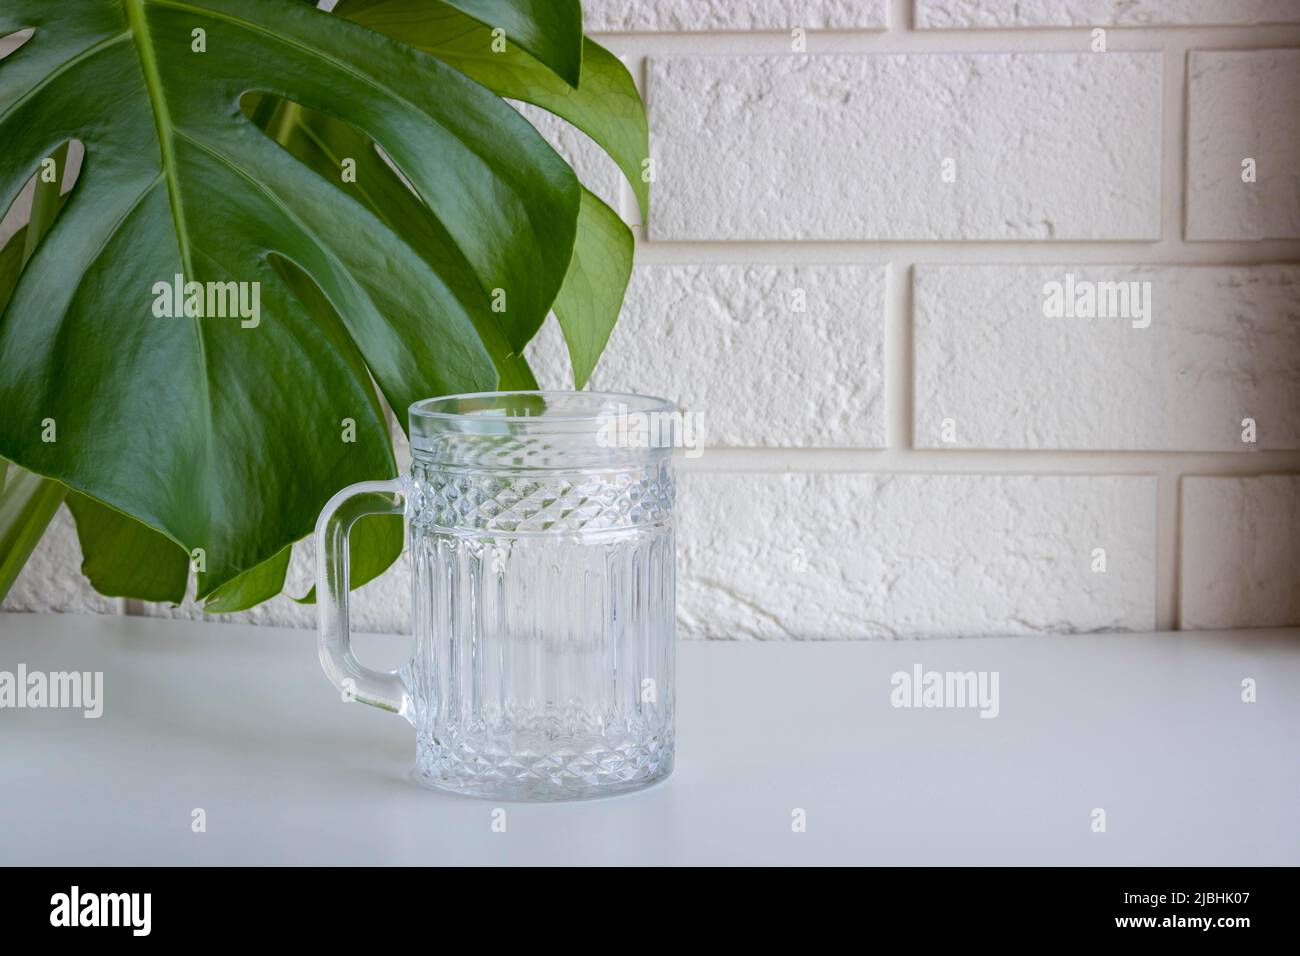 Leaves of Monstera, in front of a white brick wall next to a glass mug. Stock Photo